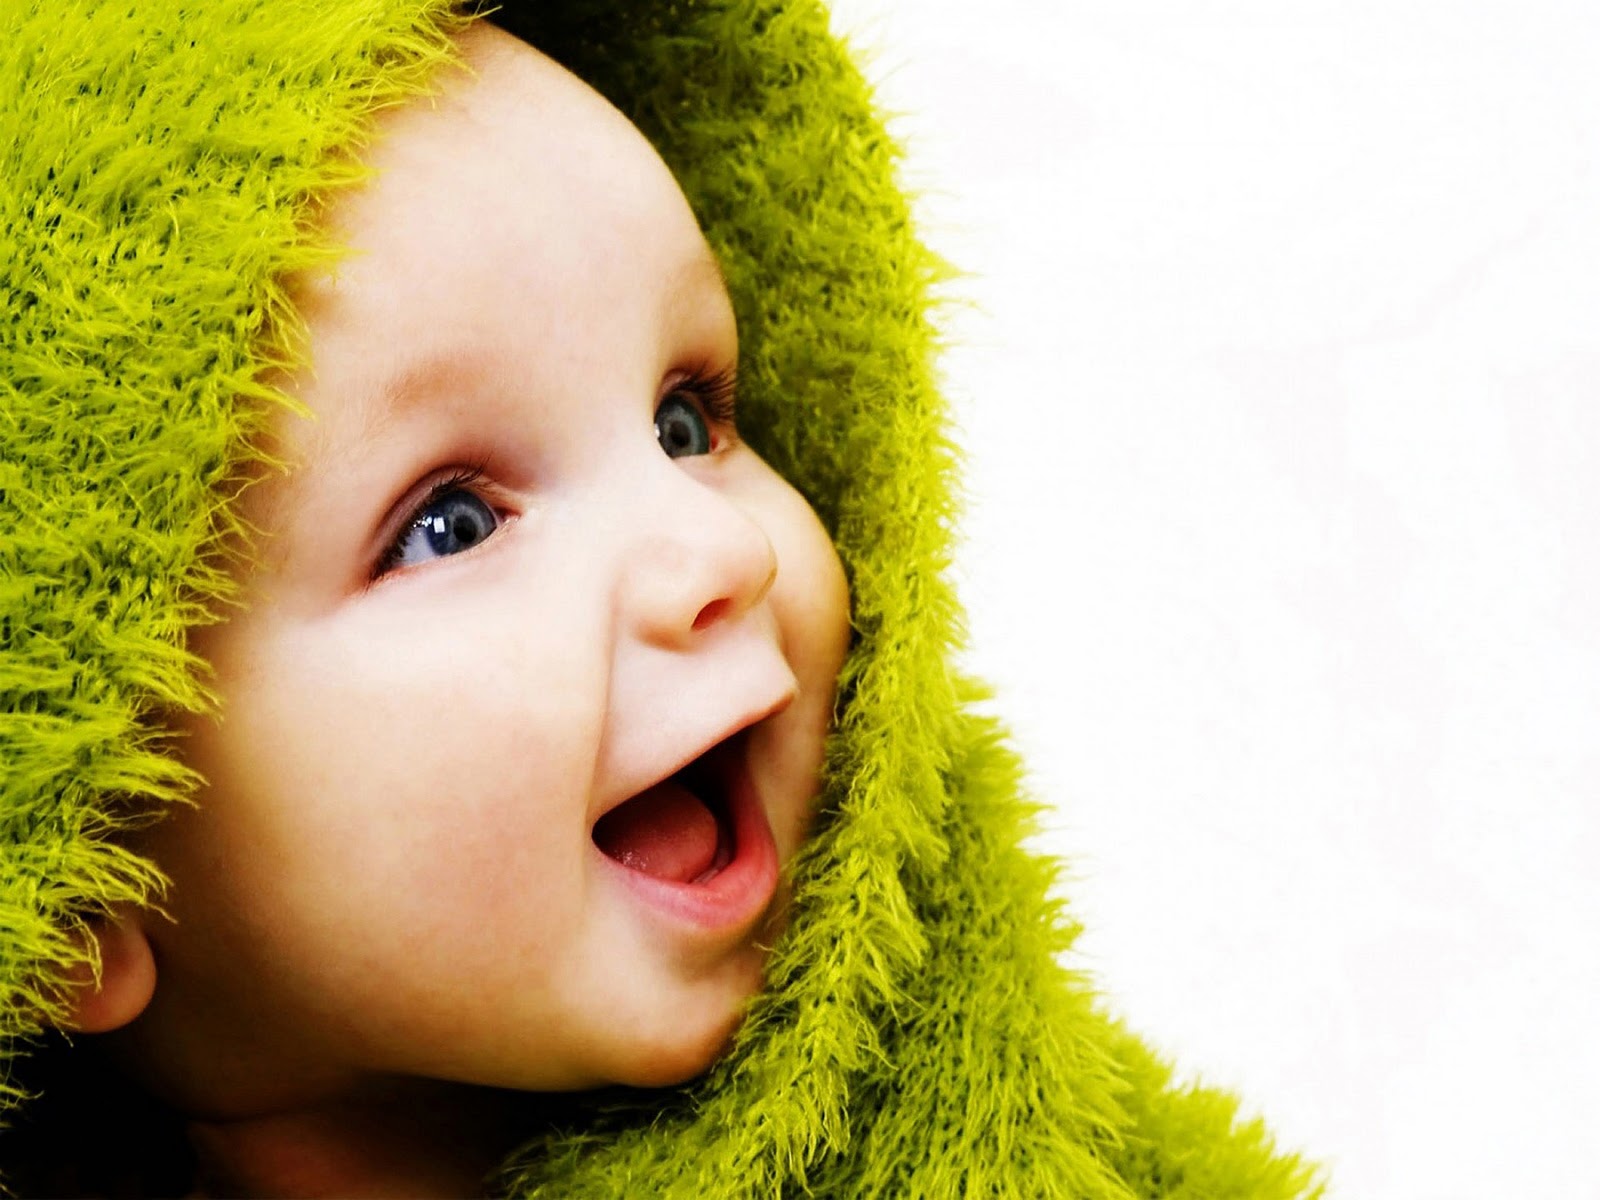 Laughing baby wallpapers